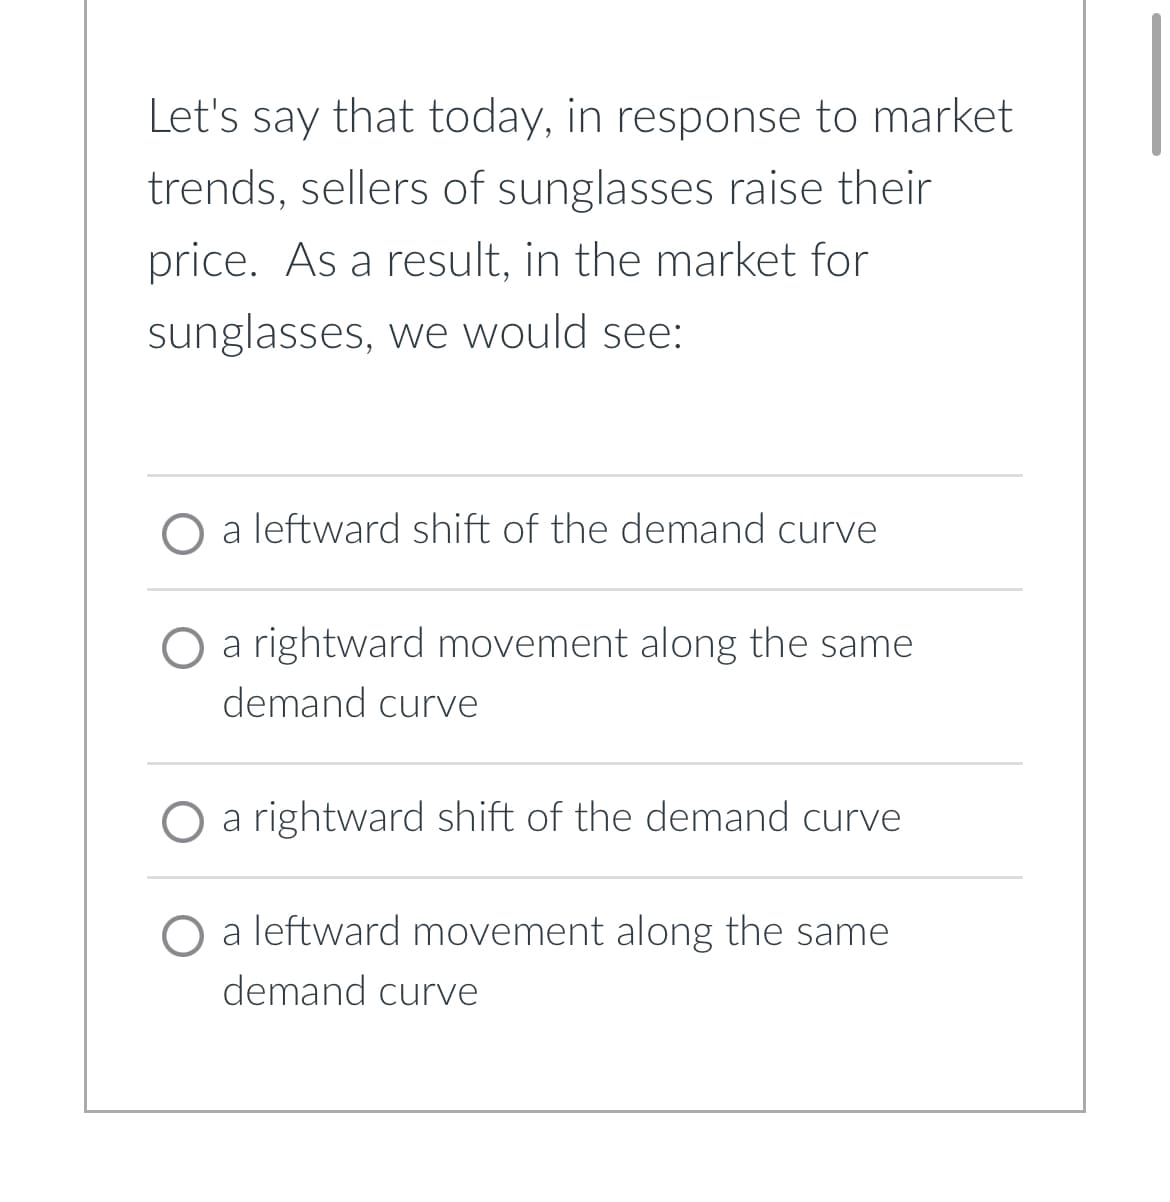 Let's say that today, in response to market
trends, sellers of sunglasses raise their
price. As a result, in the market for
sunglasses, we would see:
leftward shift of the demand curve
O a rightward movement along the same
demand curve
O a rightward shift of the demand curve
O a leftward movement along the same
demand curve